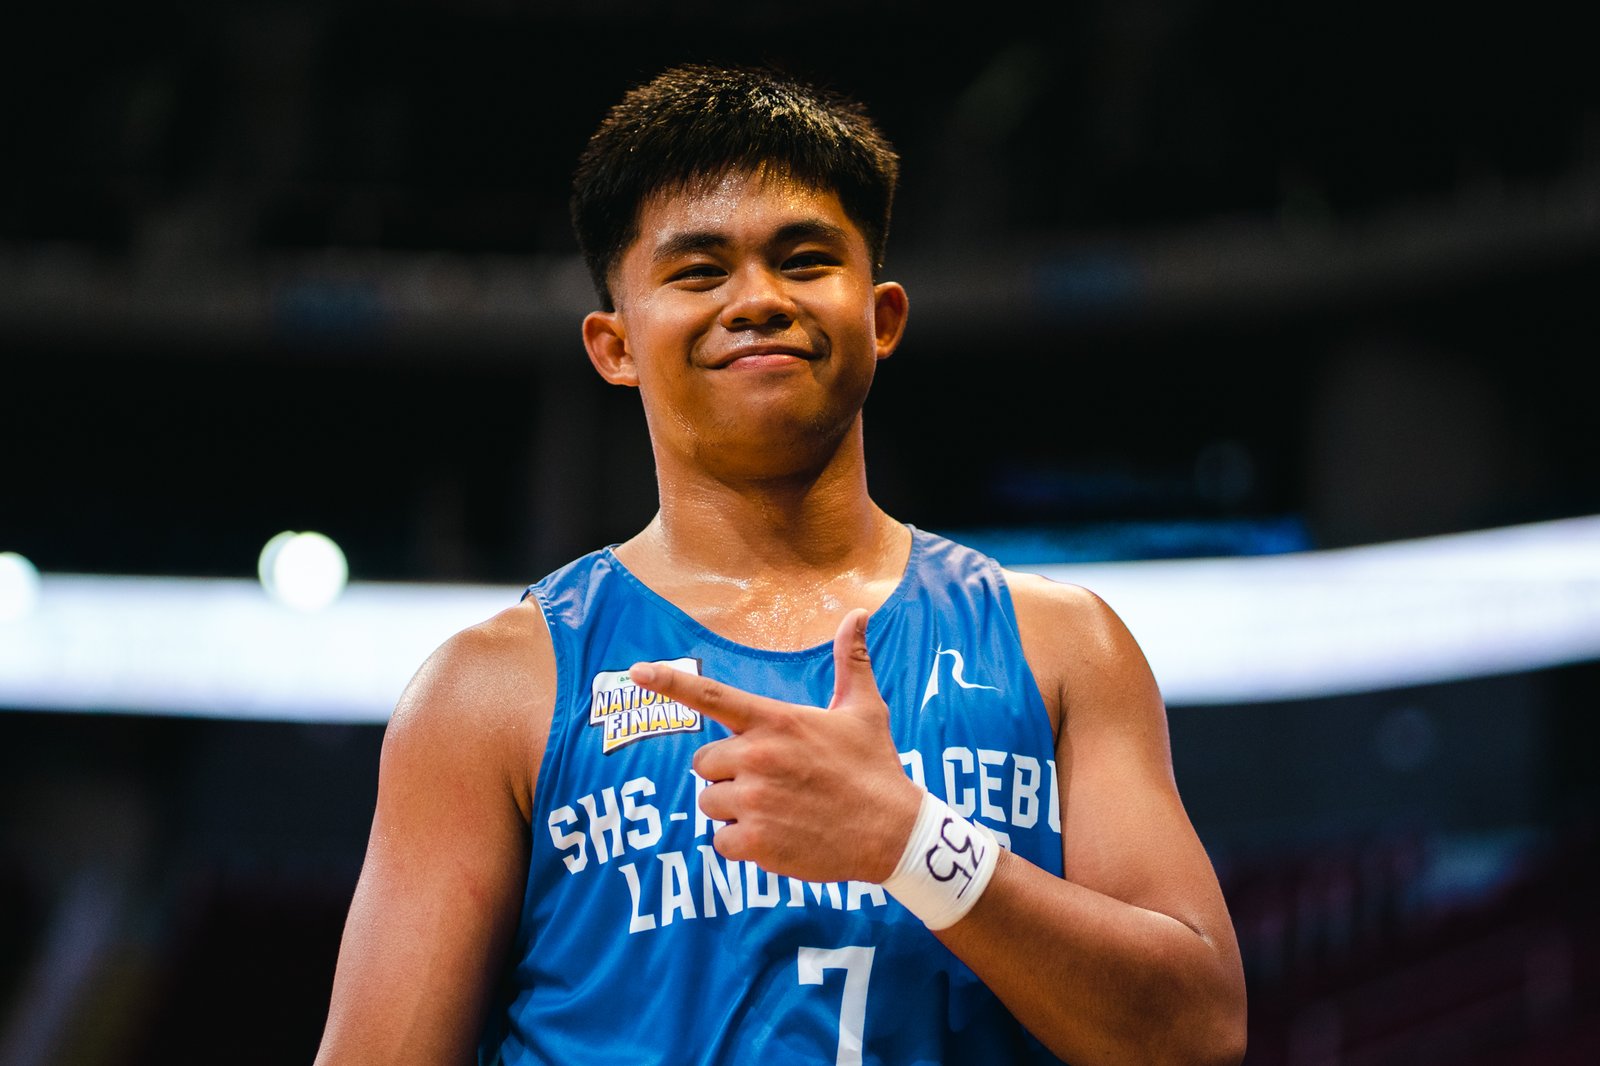 Jared Bahay tops NBTC ranking for second straight year